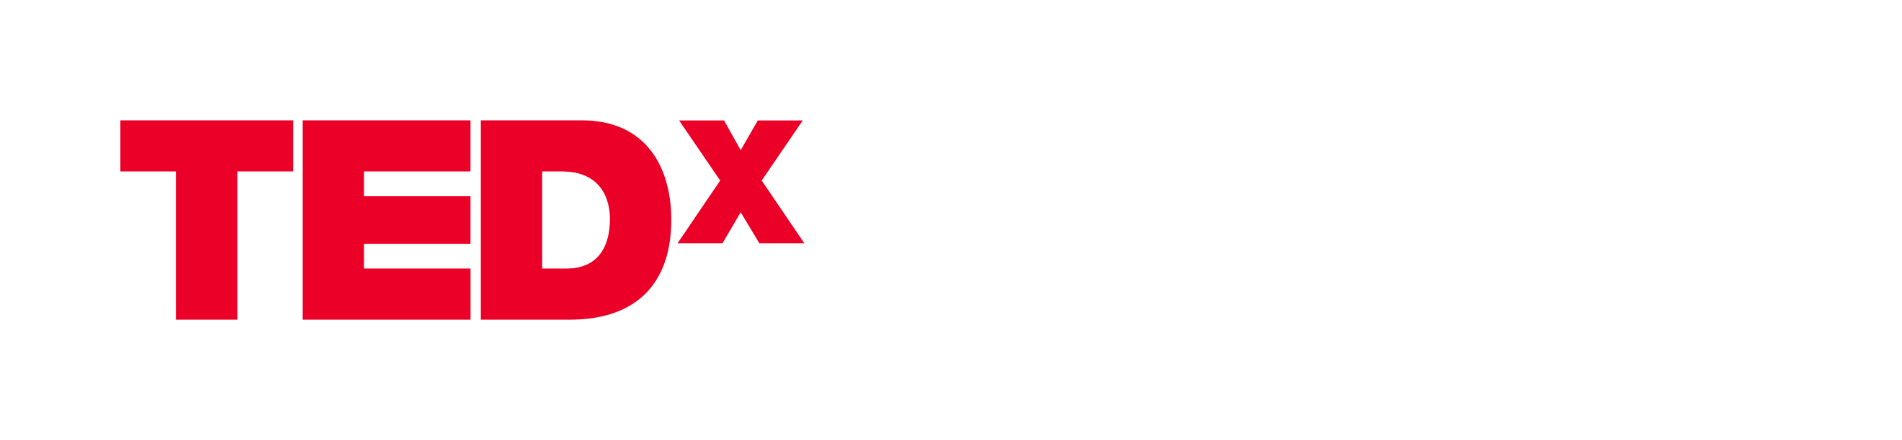 Official TEDx logo, representing the power of ideas worth spreading.